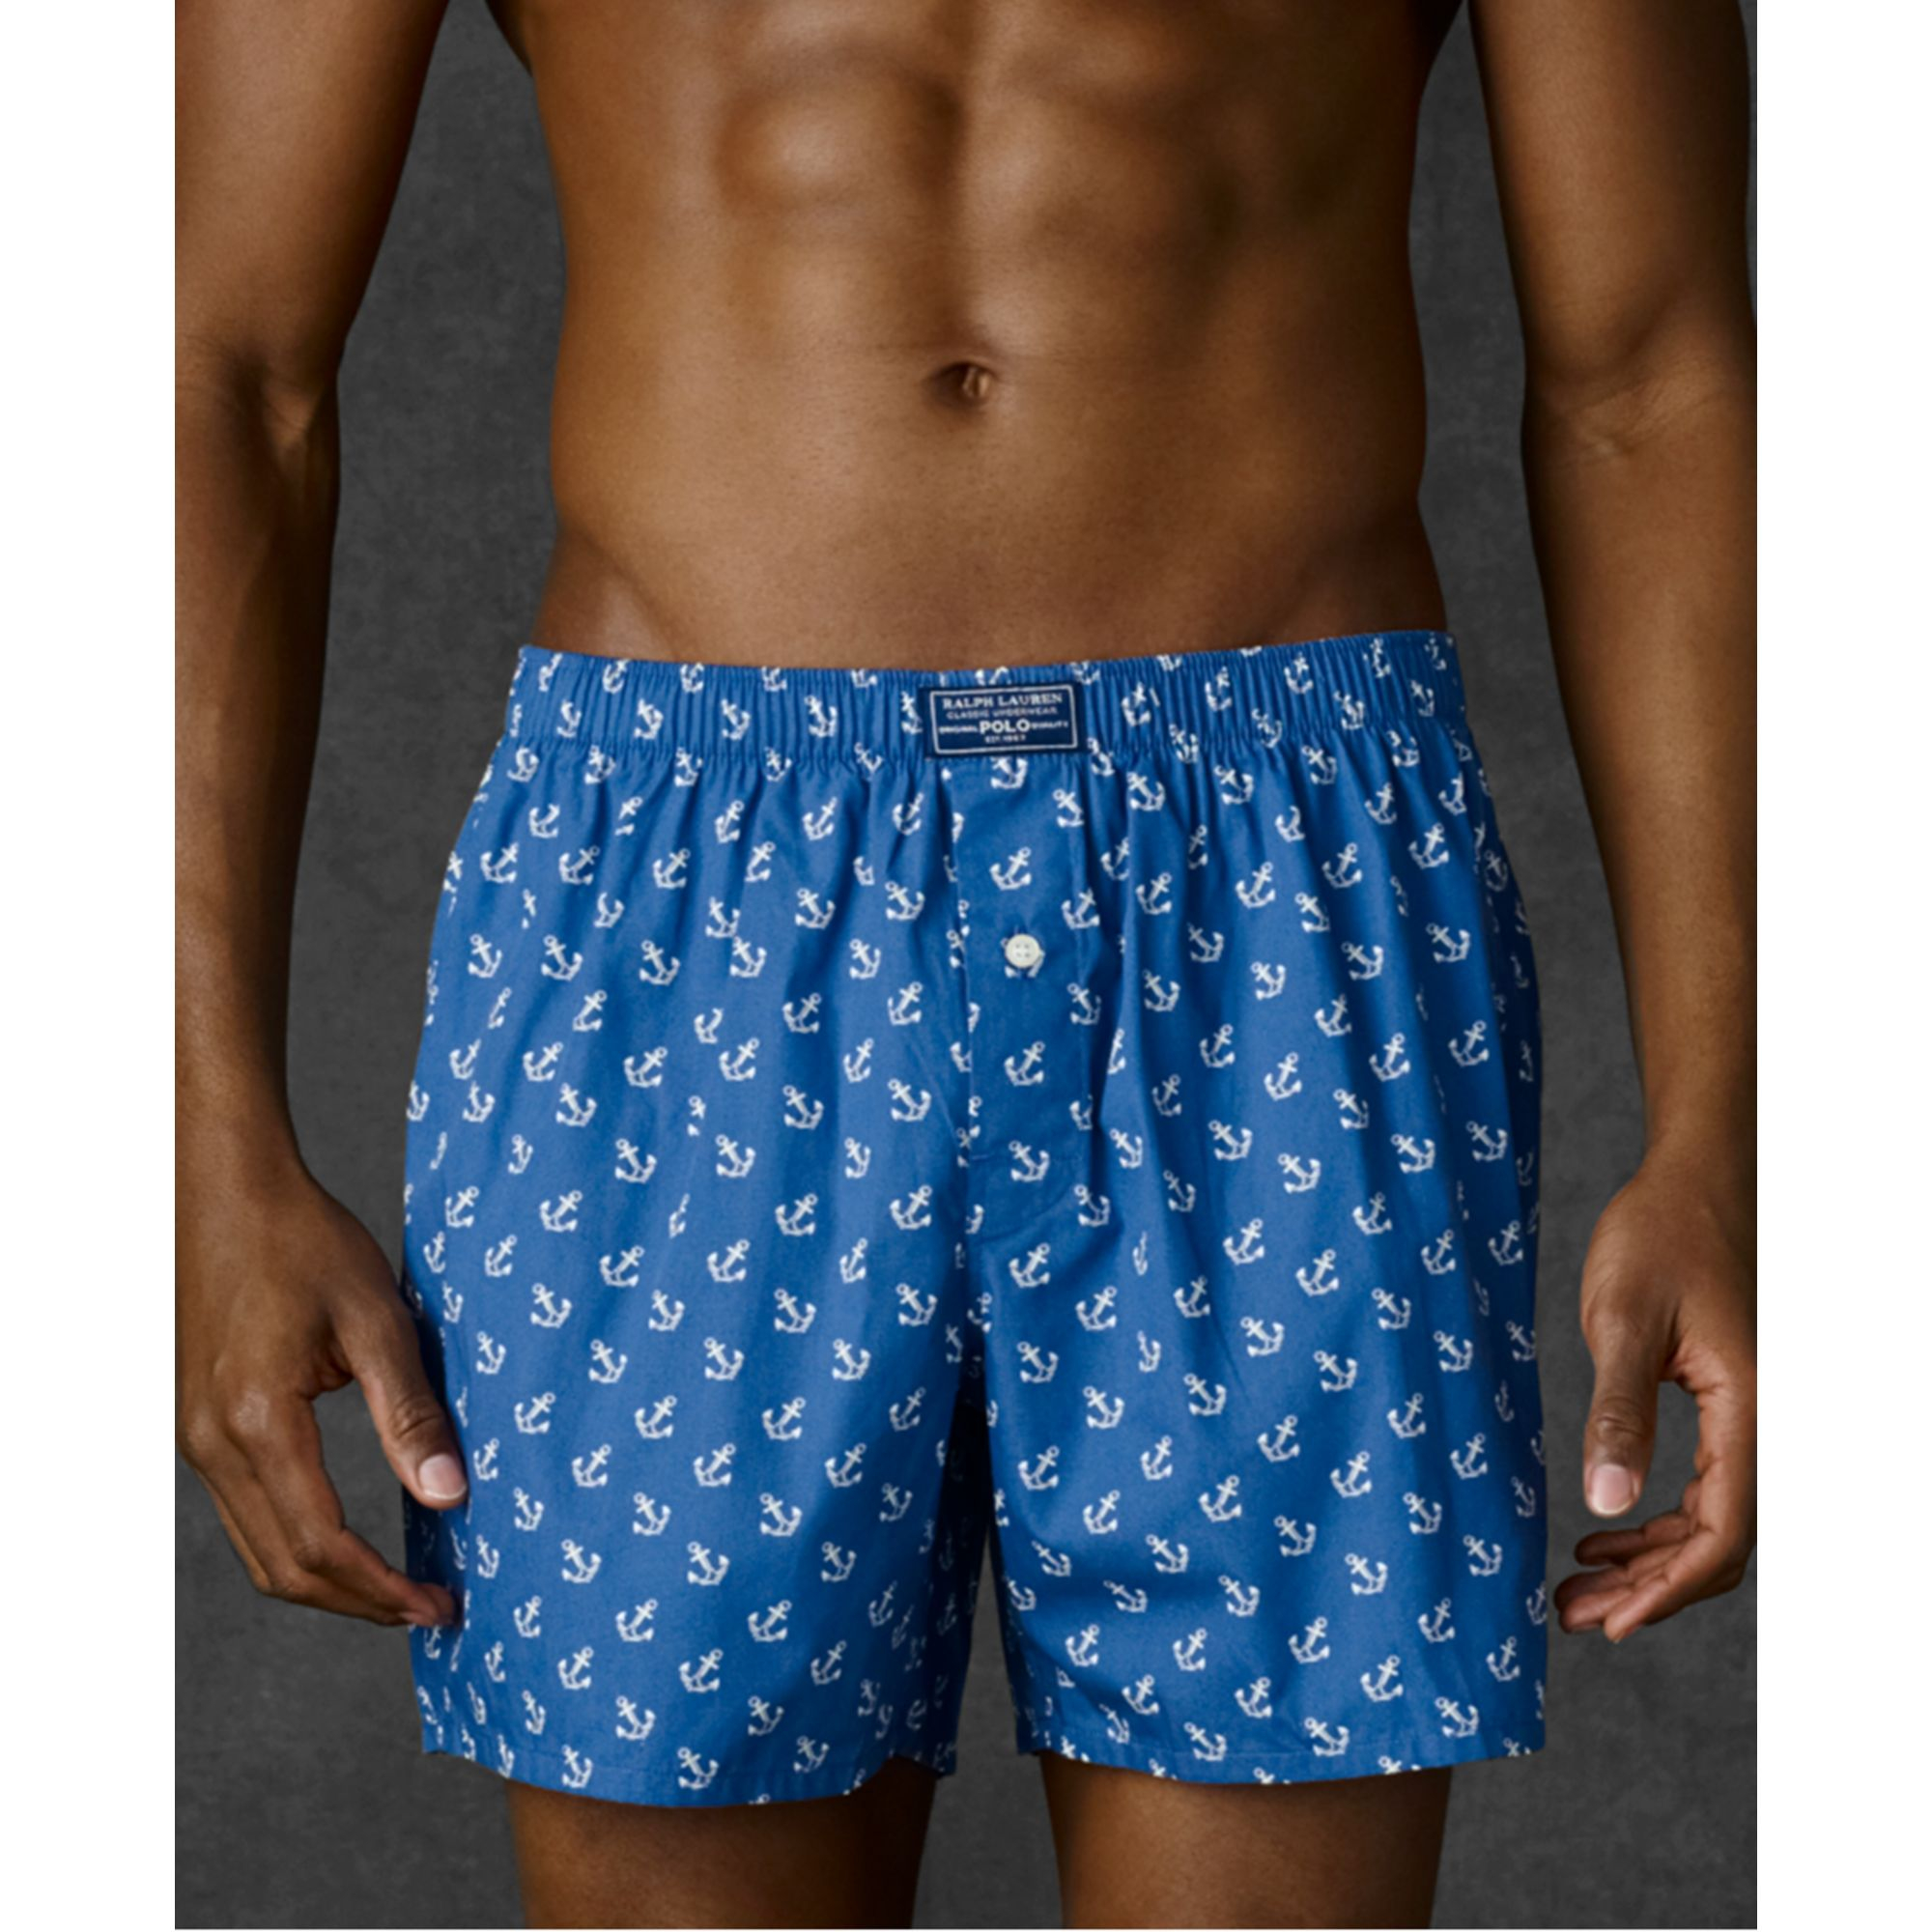 Lyst - Polo Ralph Lauren Polo Mens Woven Plaid Boxer Shorts in Blue for Men